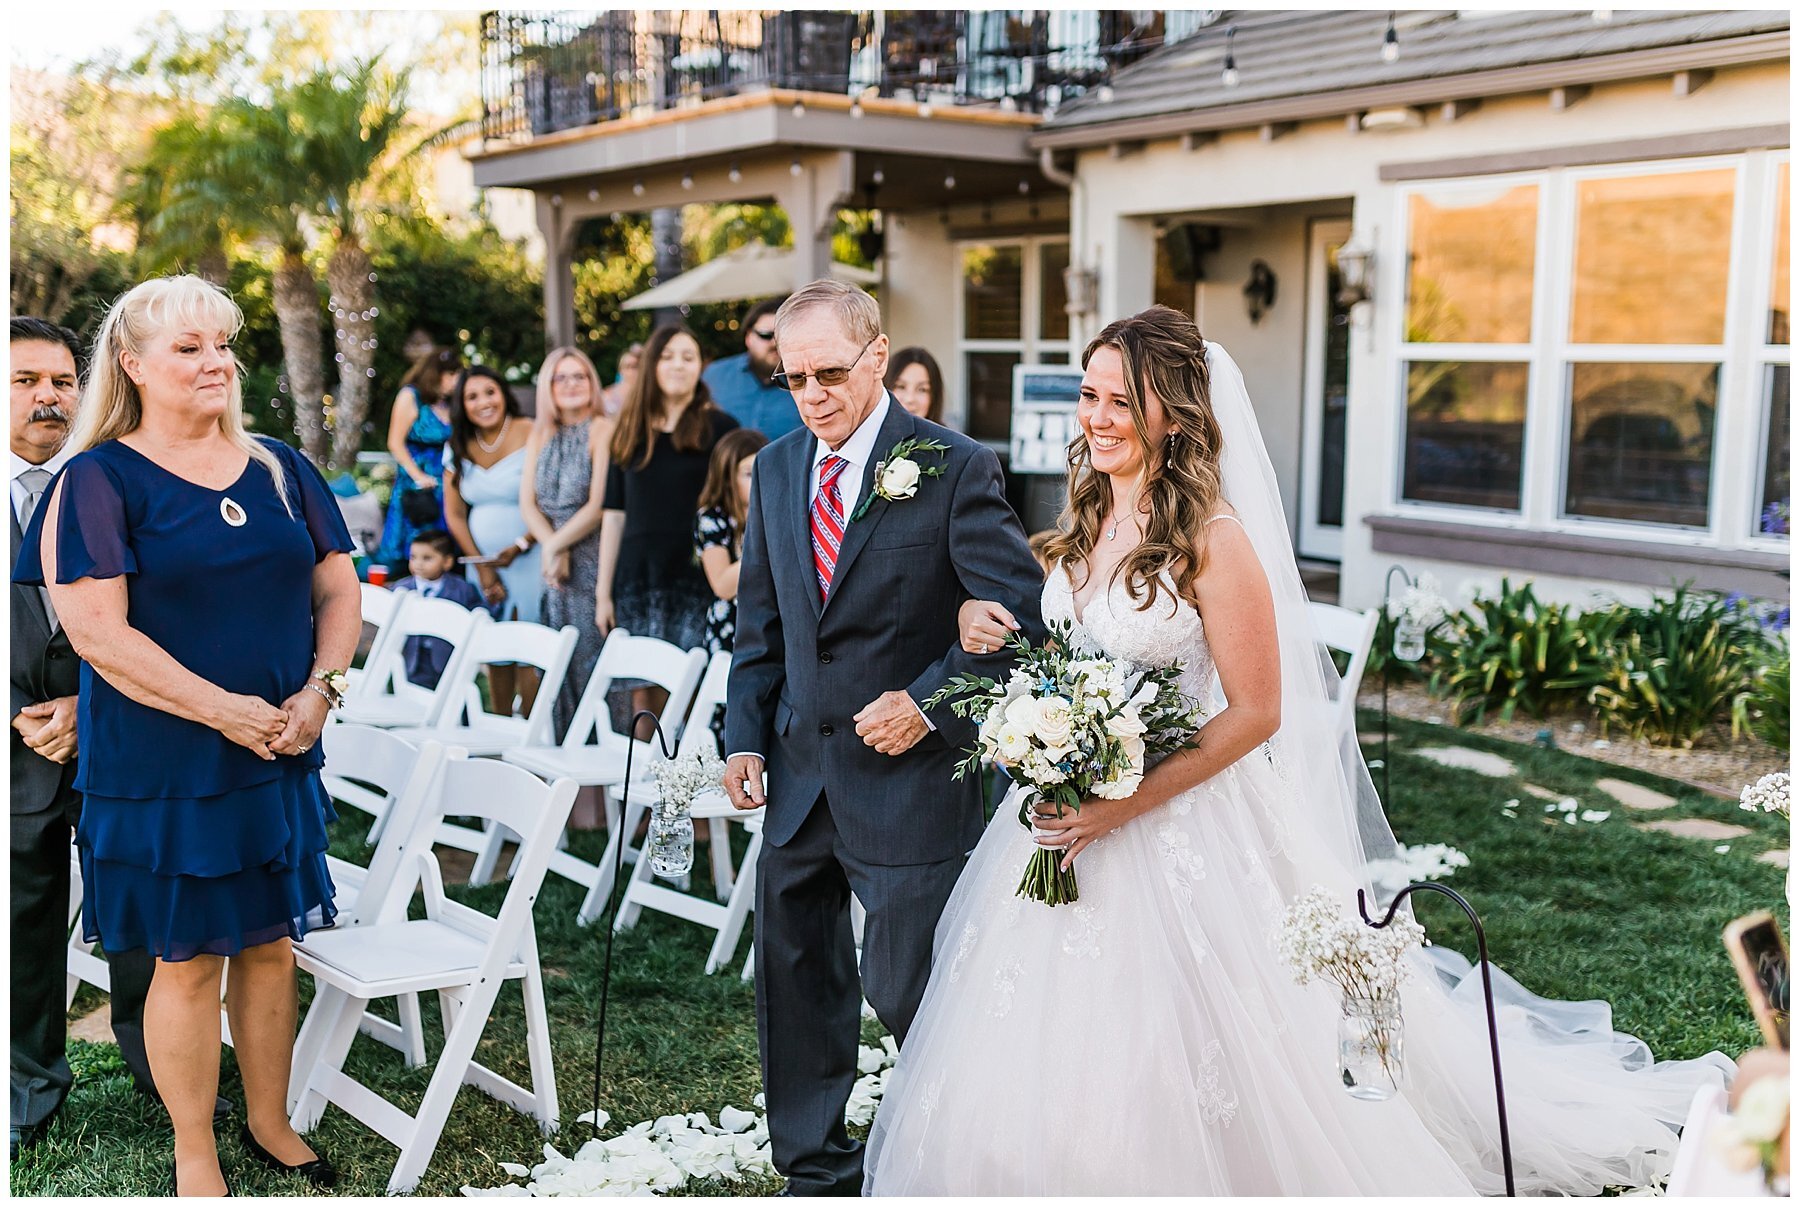  father walking the bride down the aisle 